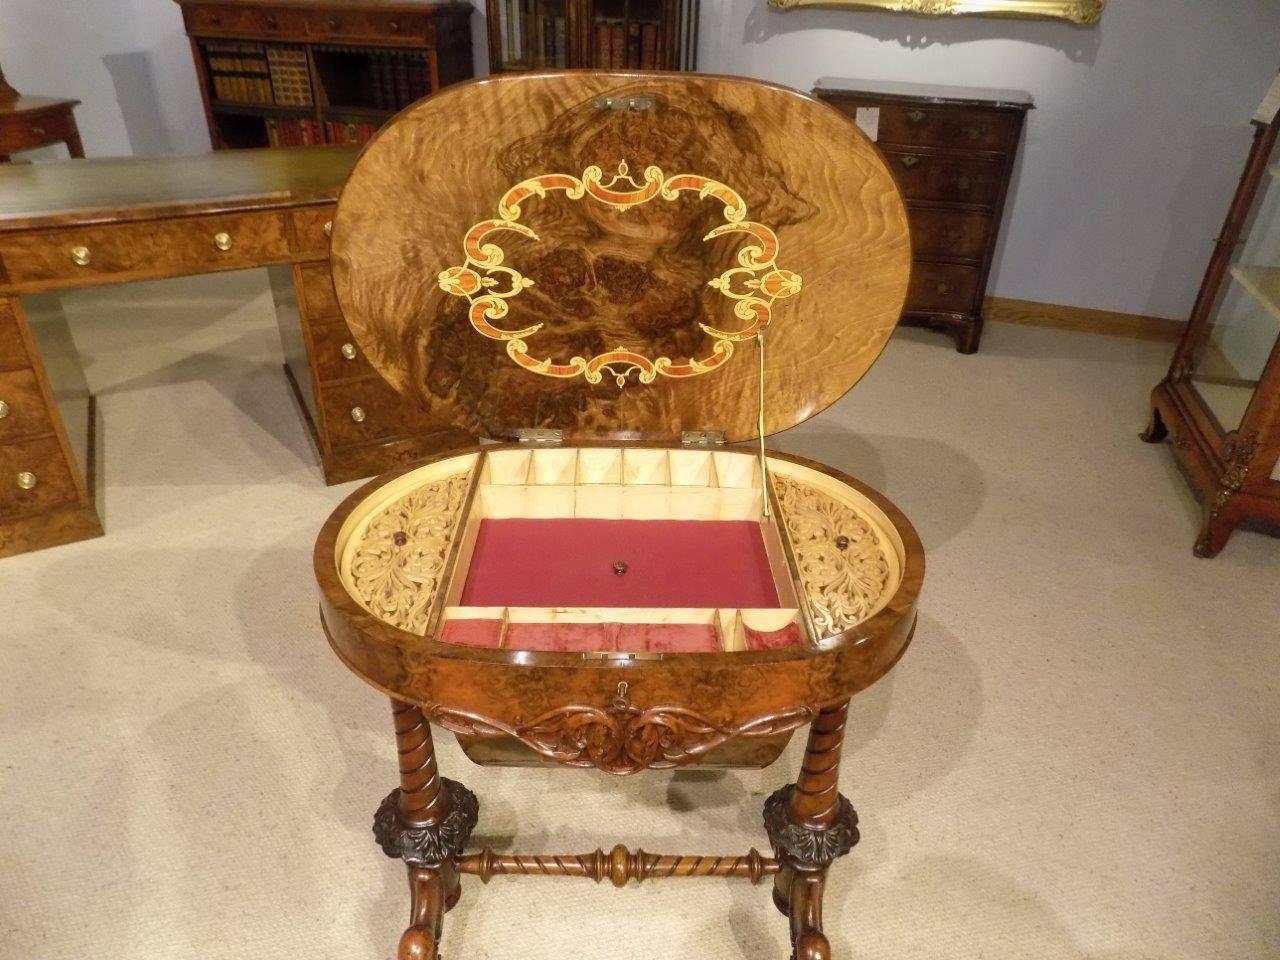 Mid-19th Century Superb Quality Burr Walnut Victorian Period Oval Shaped Antique Sewing Table